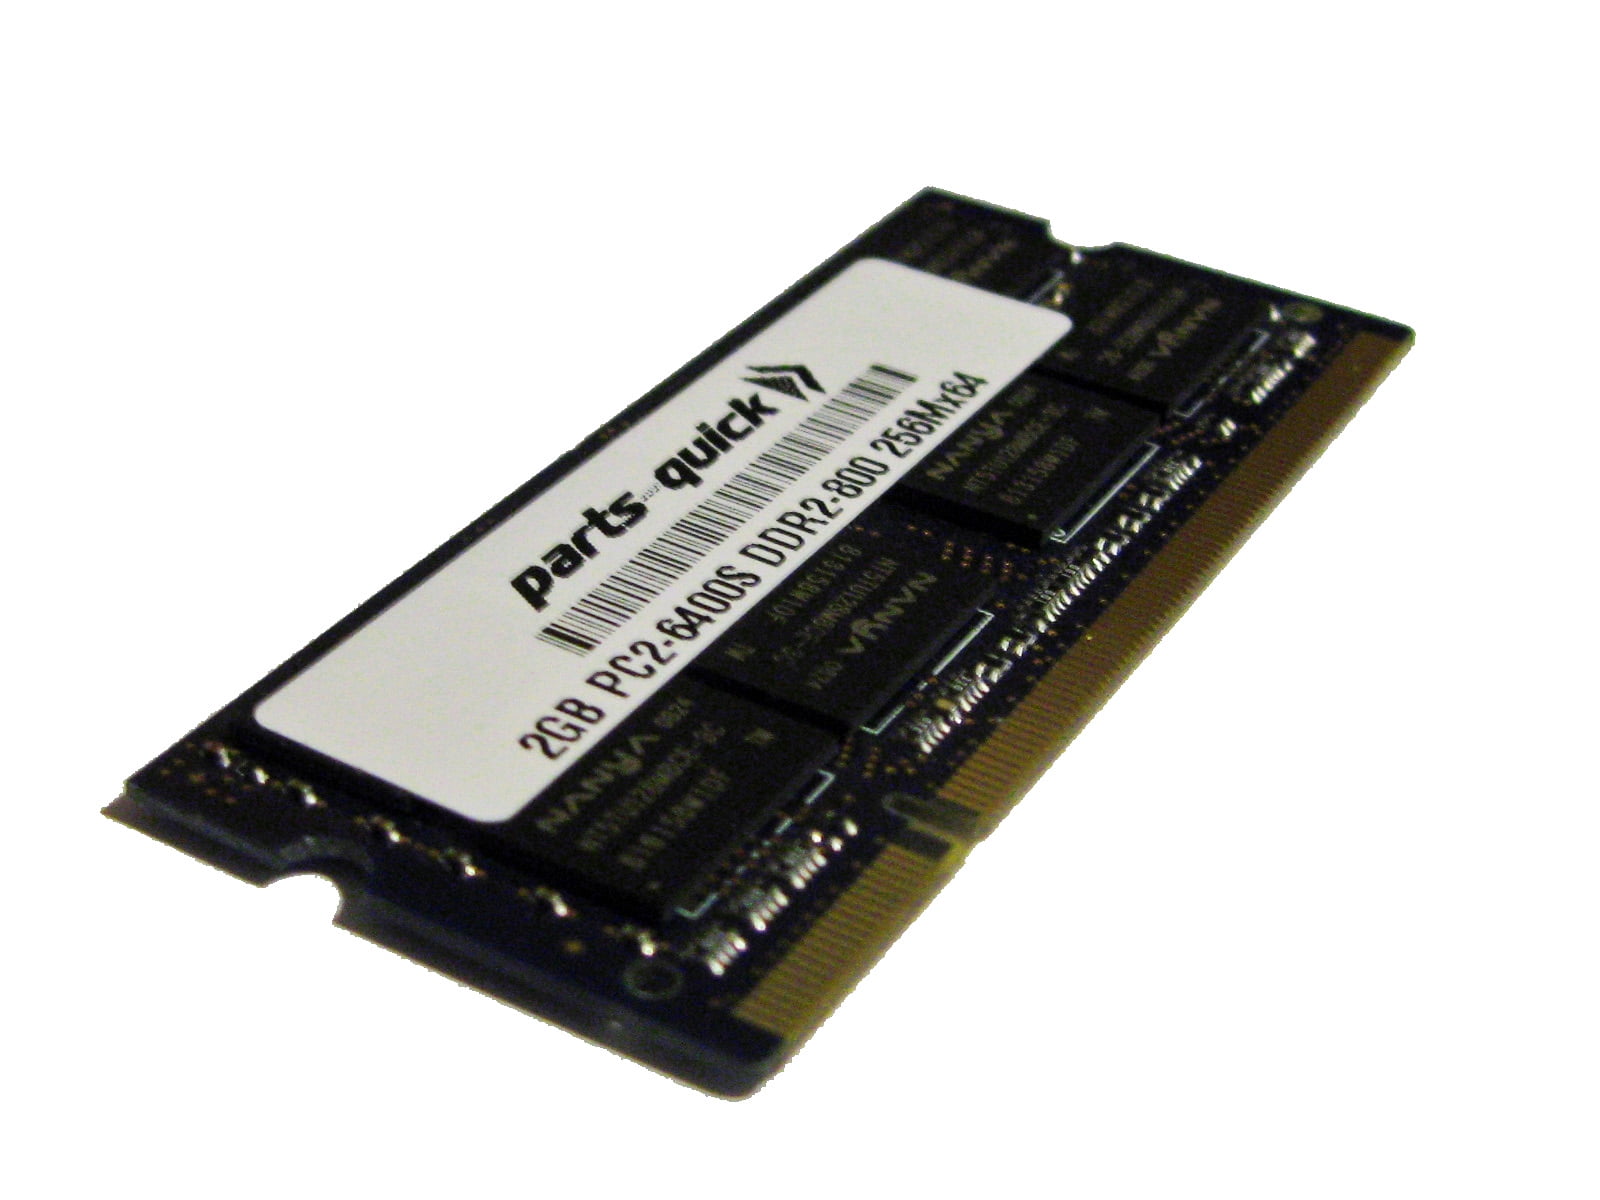 2GB DDR2 800MHz RAM Memory Upgrade for HP Notebook G62 Series (PARTS-QUICK) Walmart.com